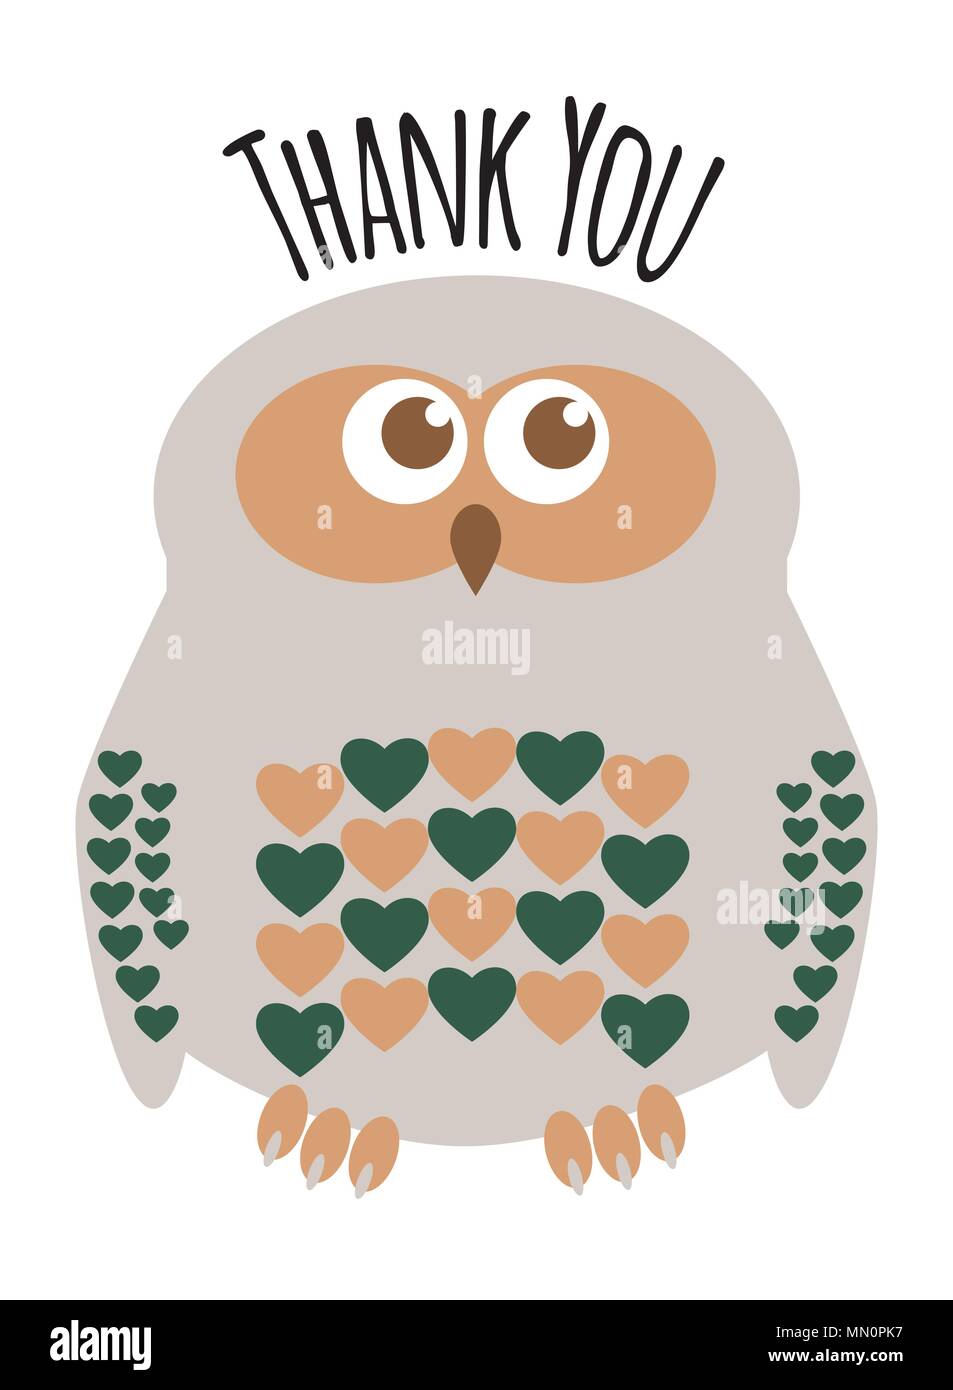 Owl cute character with hearts for feathers greeting card with text  'Thank You'. Editable labelled layers. Stock Vector